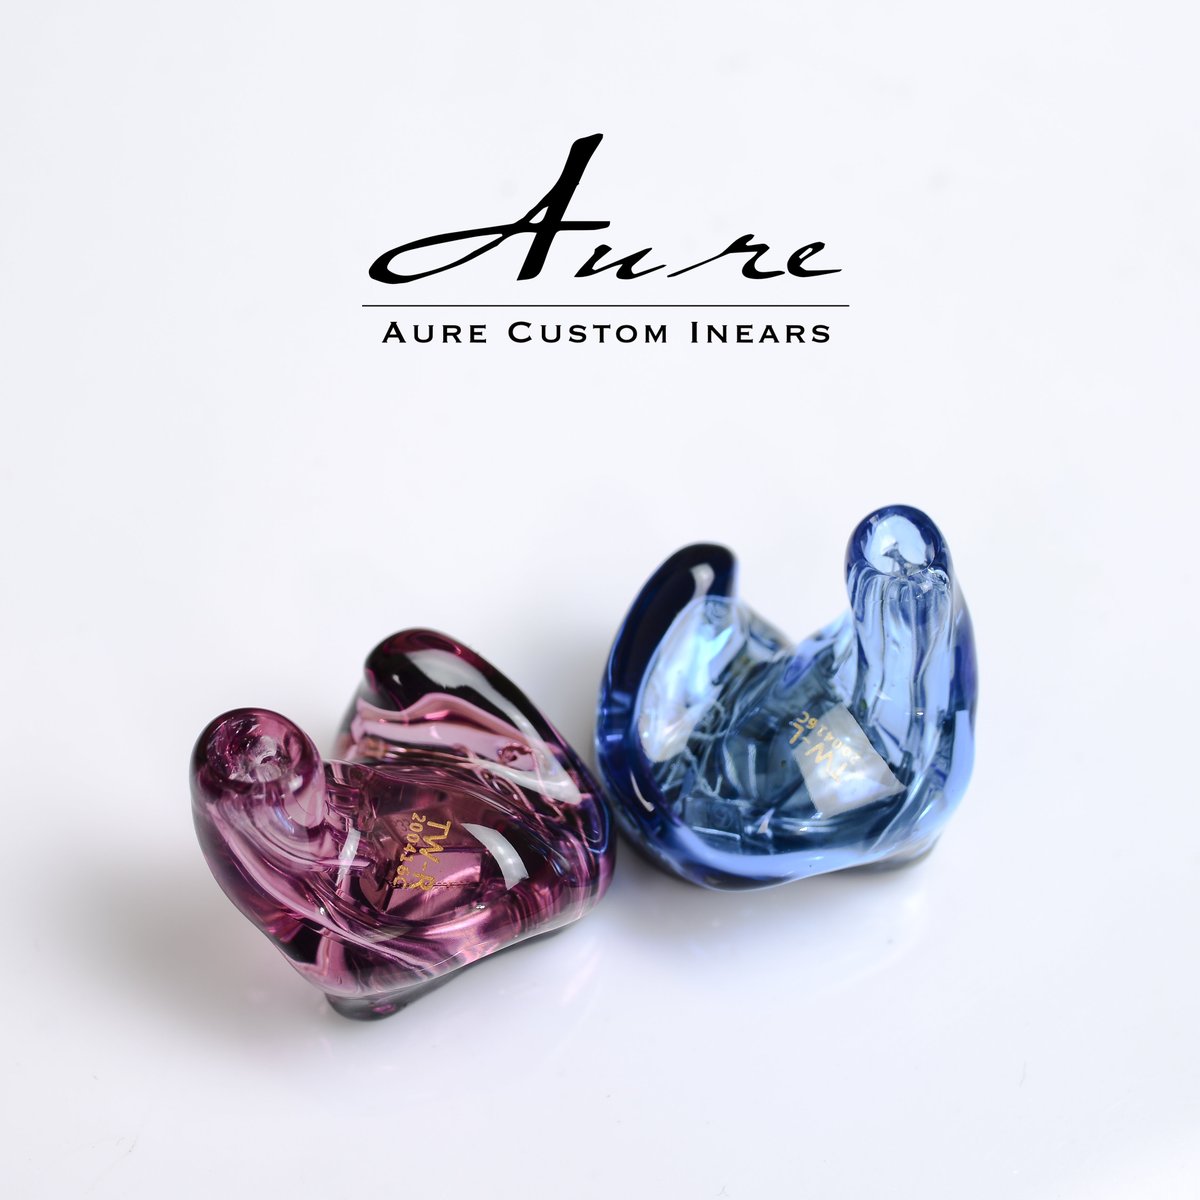 Reshell TF10+1 ultra-high BA, sounds more smooth and clear.

#aurecustom #earphone #earphones #カスタムiem #イヤホン #inears #iems #iem #ciem  #custominears #customs #audioengineer  #customiem #custominearmonitors #audiophile #headfi #reshell #upgradecable #music #upgradcables